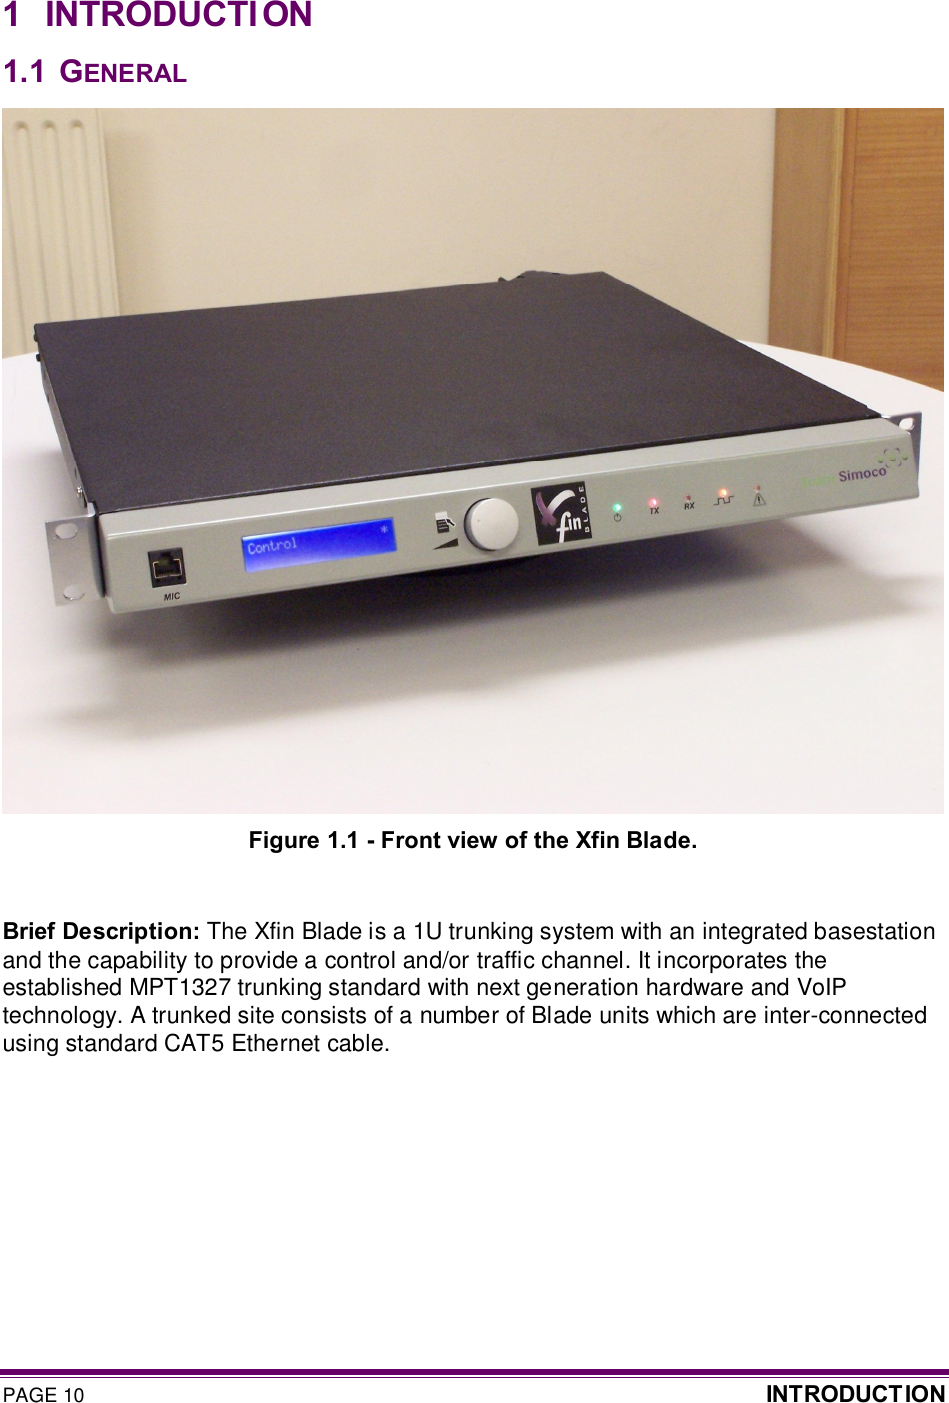 PAGE 10  INTRODUCT ION  1  INTRODUCTI ON 1.1  GENERAL  Figure 1.1 - Front view of the Xfin Blade.  Brief Description: The Xfin Blade is a 1U trunking system with an integrated basestation and the capability to provide a control and/or traffic channel. It incorporates the established MPT1327 trunking standard with next generation hardware and VoIP technology. A trunked site consists of a number of Blade units which are inter-connected using standard CAT5 Ethernet cable.     